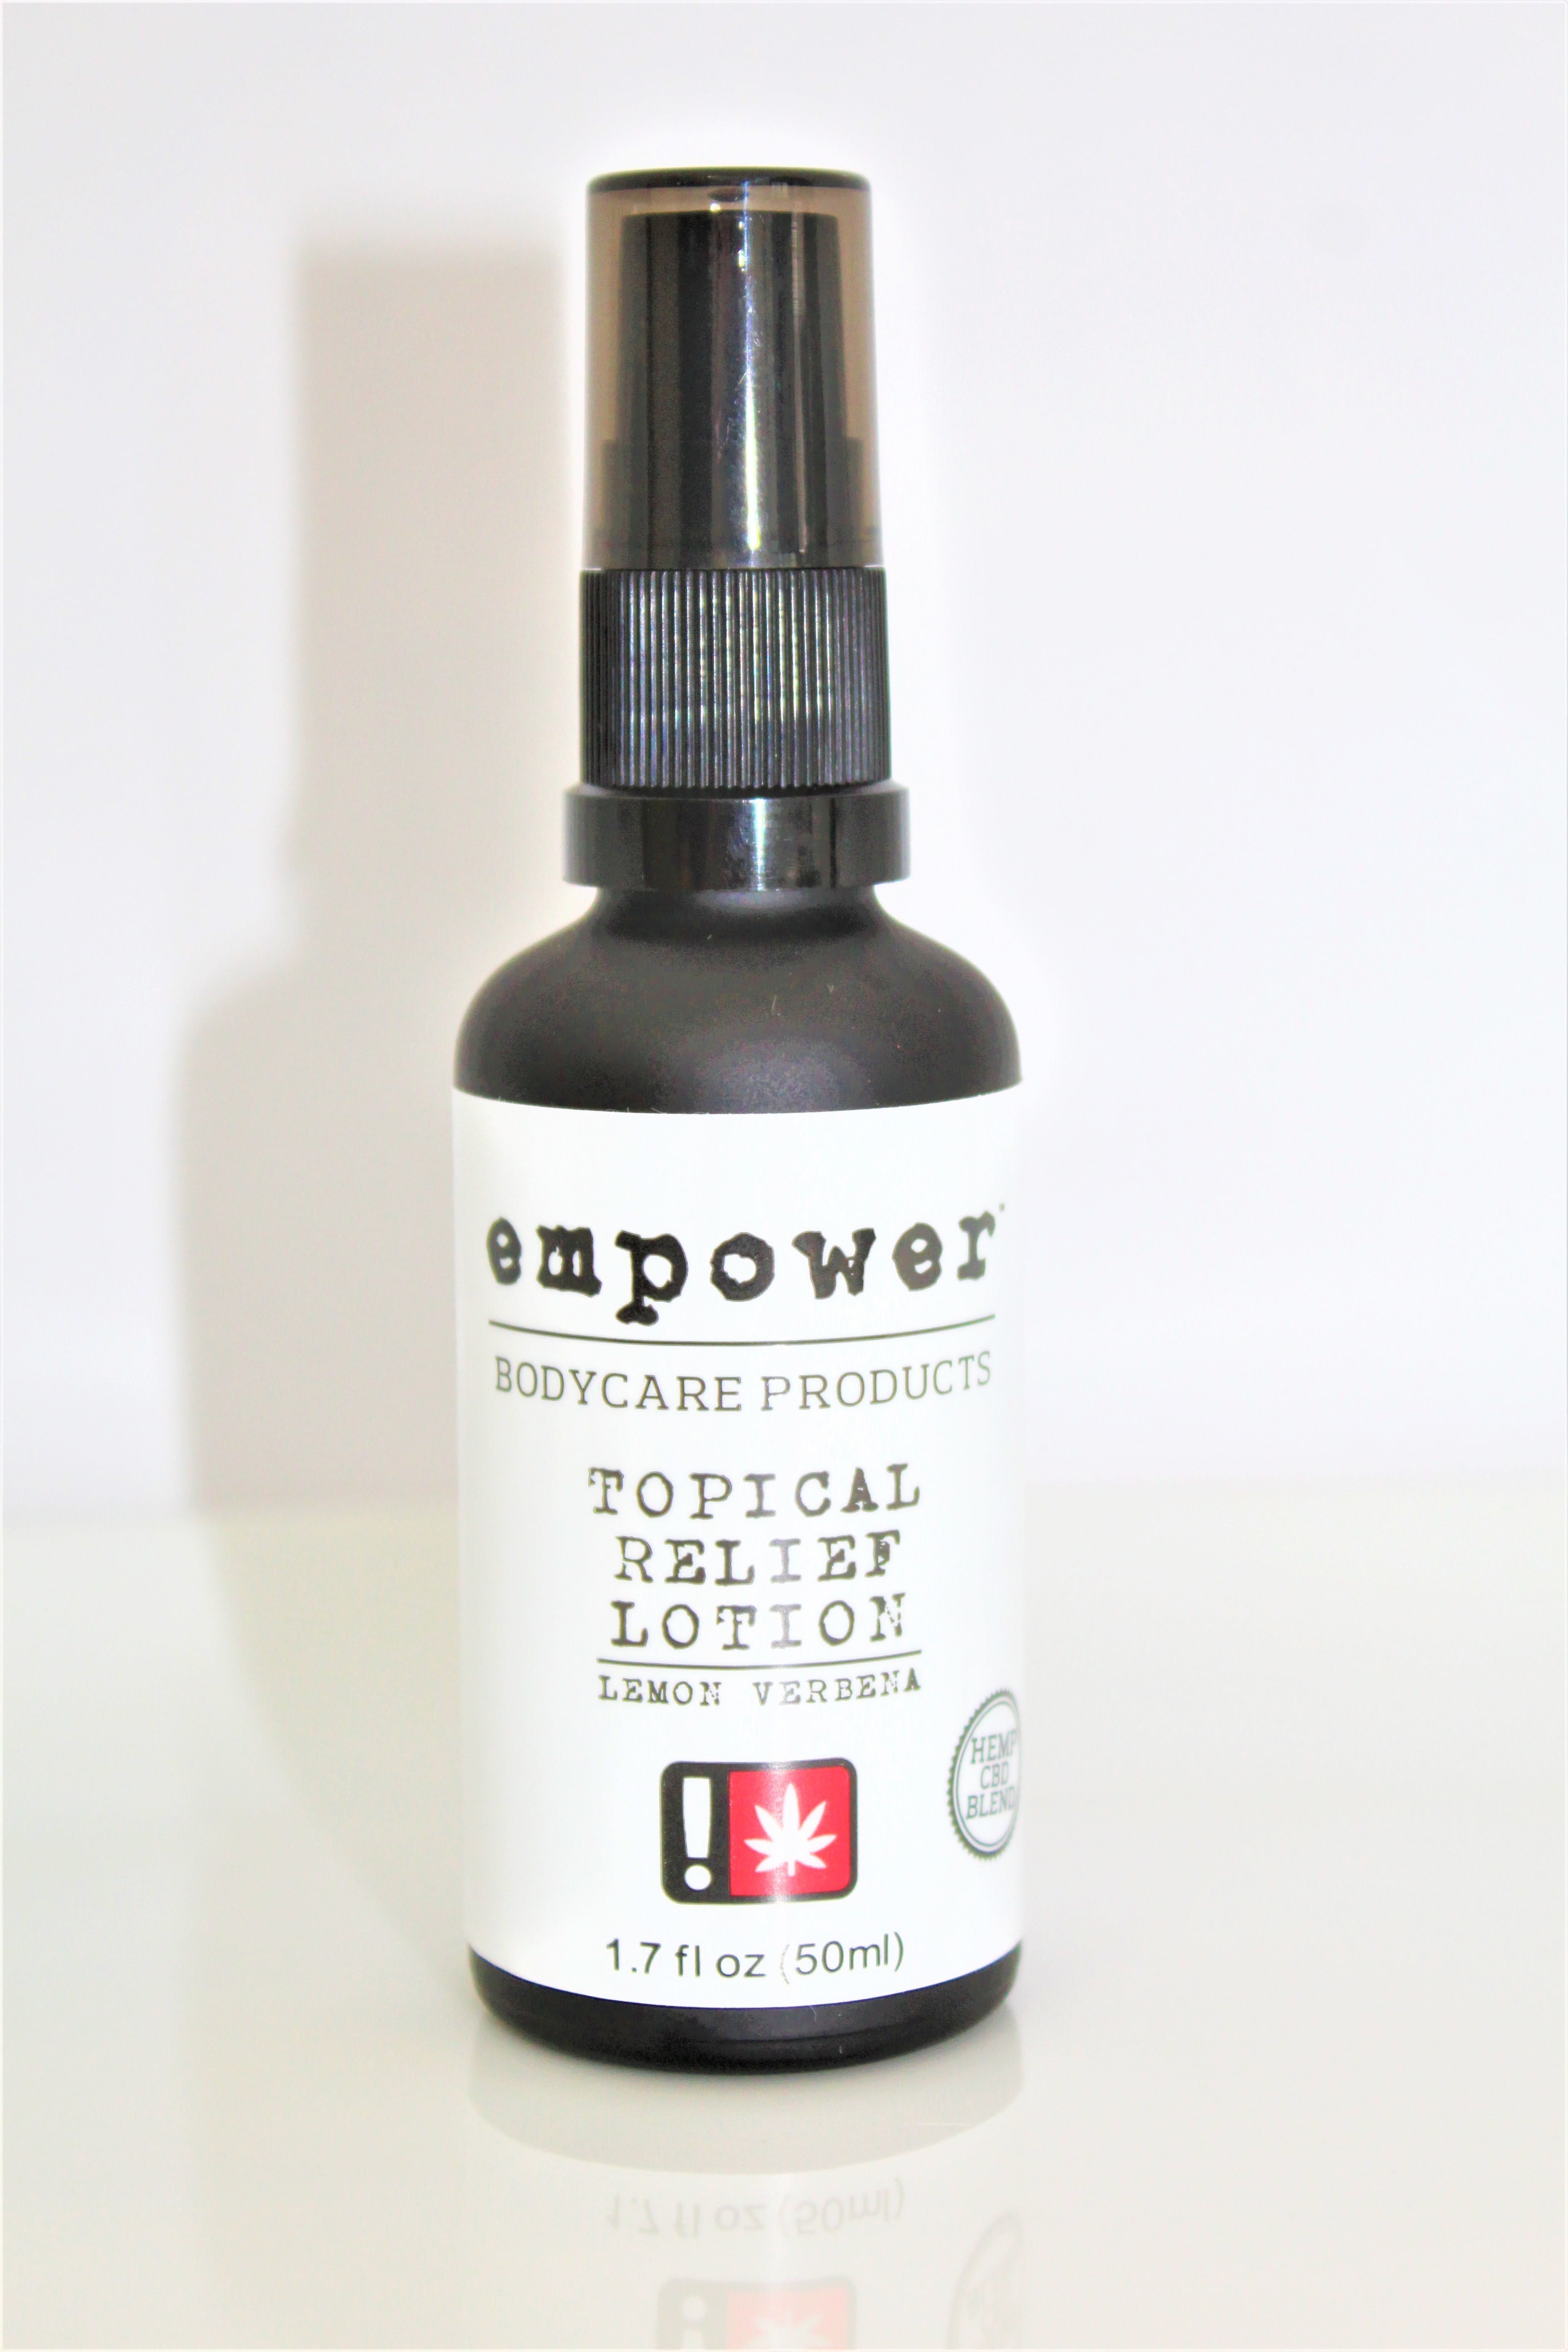 topicals-white-label-topical-relief-lotion-50ml-185-5mg-cbd-empower